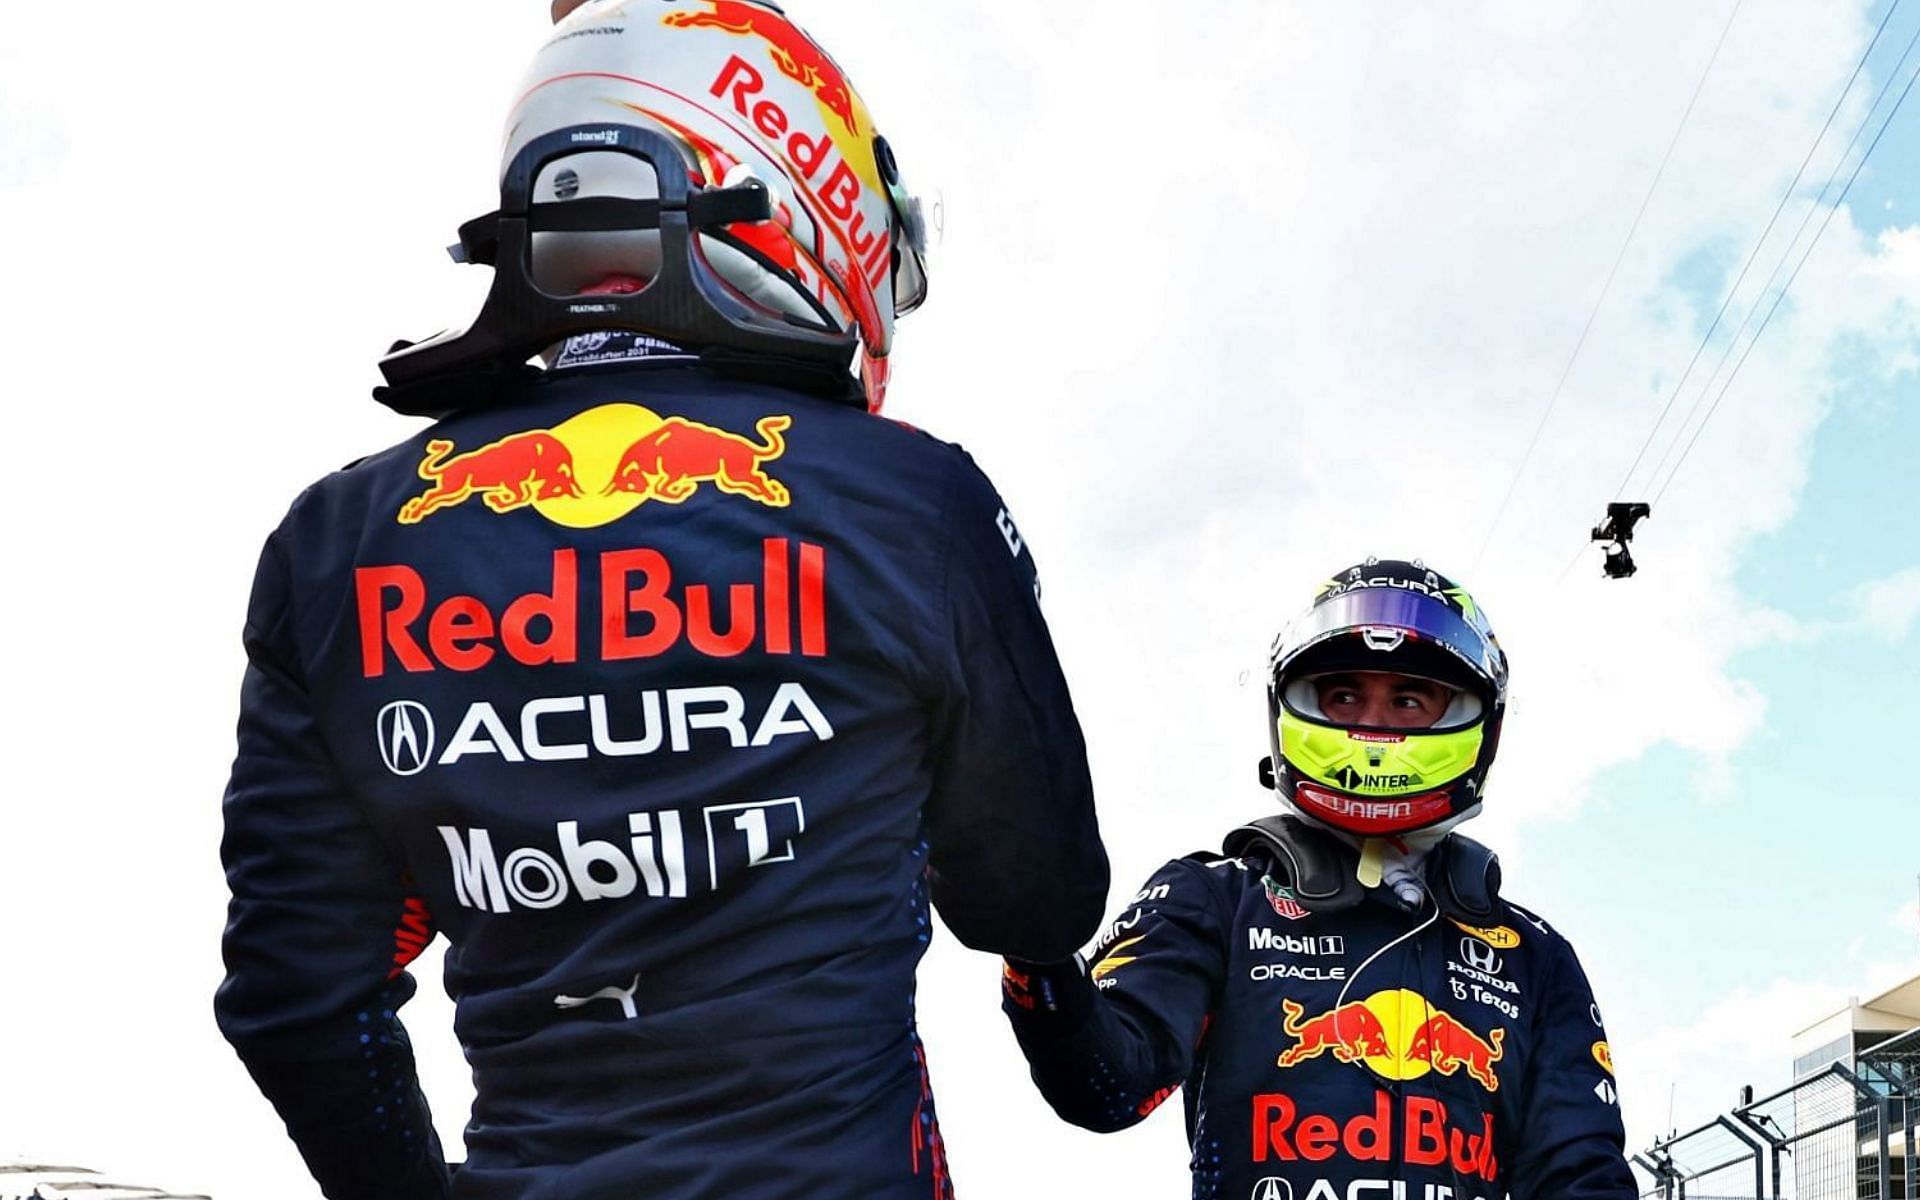 Max Verstappen (left) and Sergio Perez (right) congratulate each other after locking out the front row for the 2021 United States Grand Prix